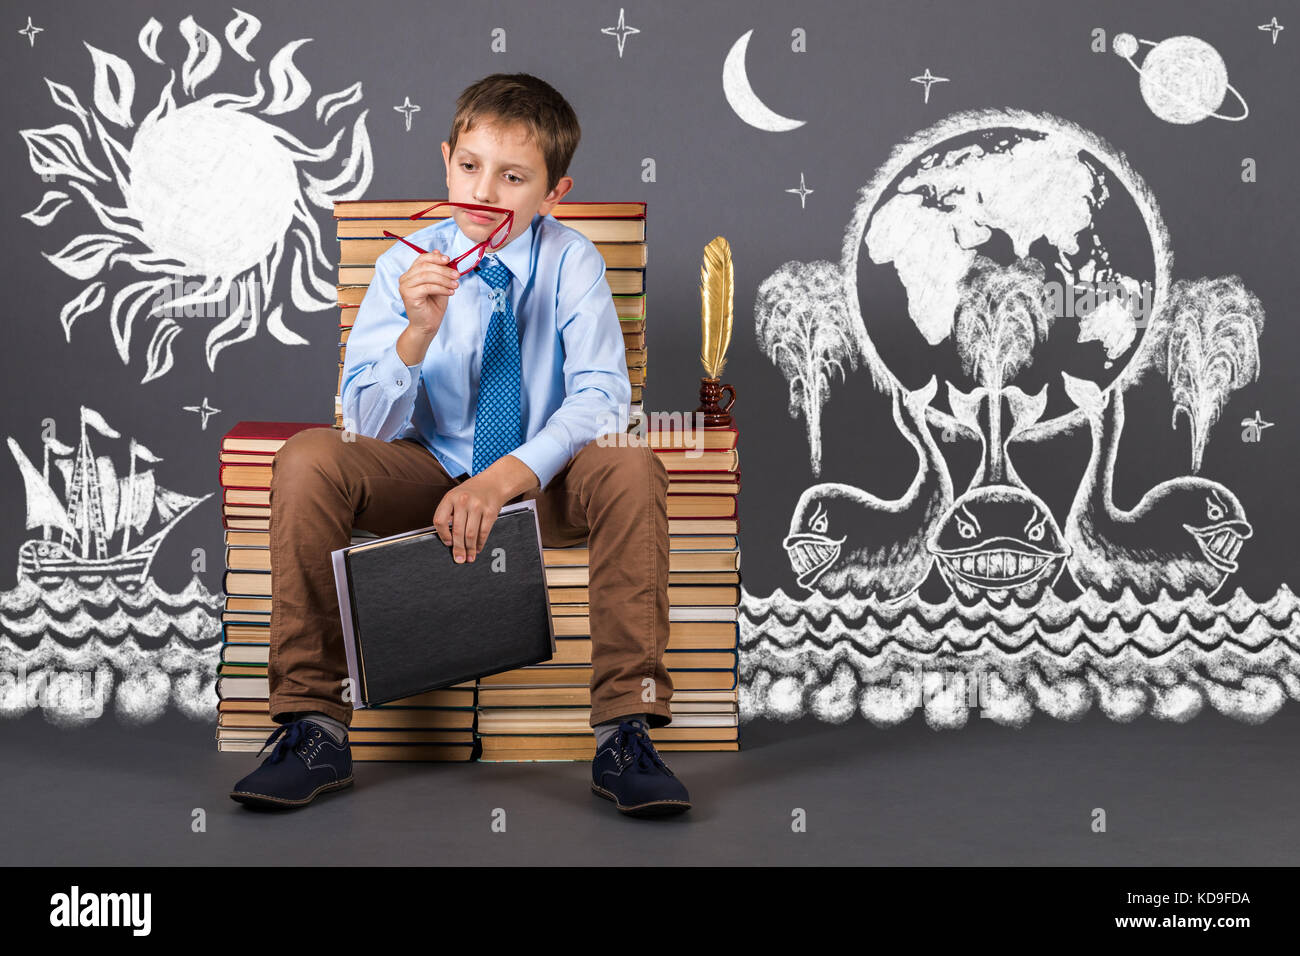 Education idea. A boy sitting on a throne of books, thinking about the structure of the universe Stock Photo